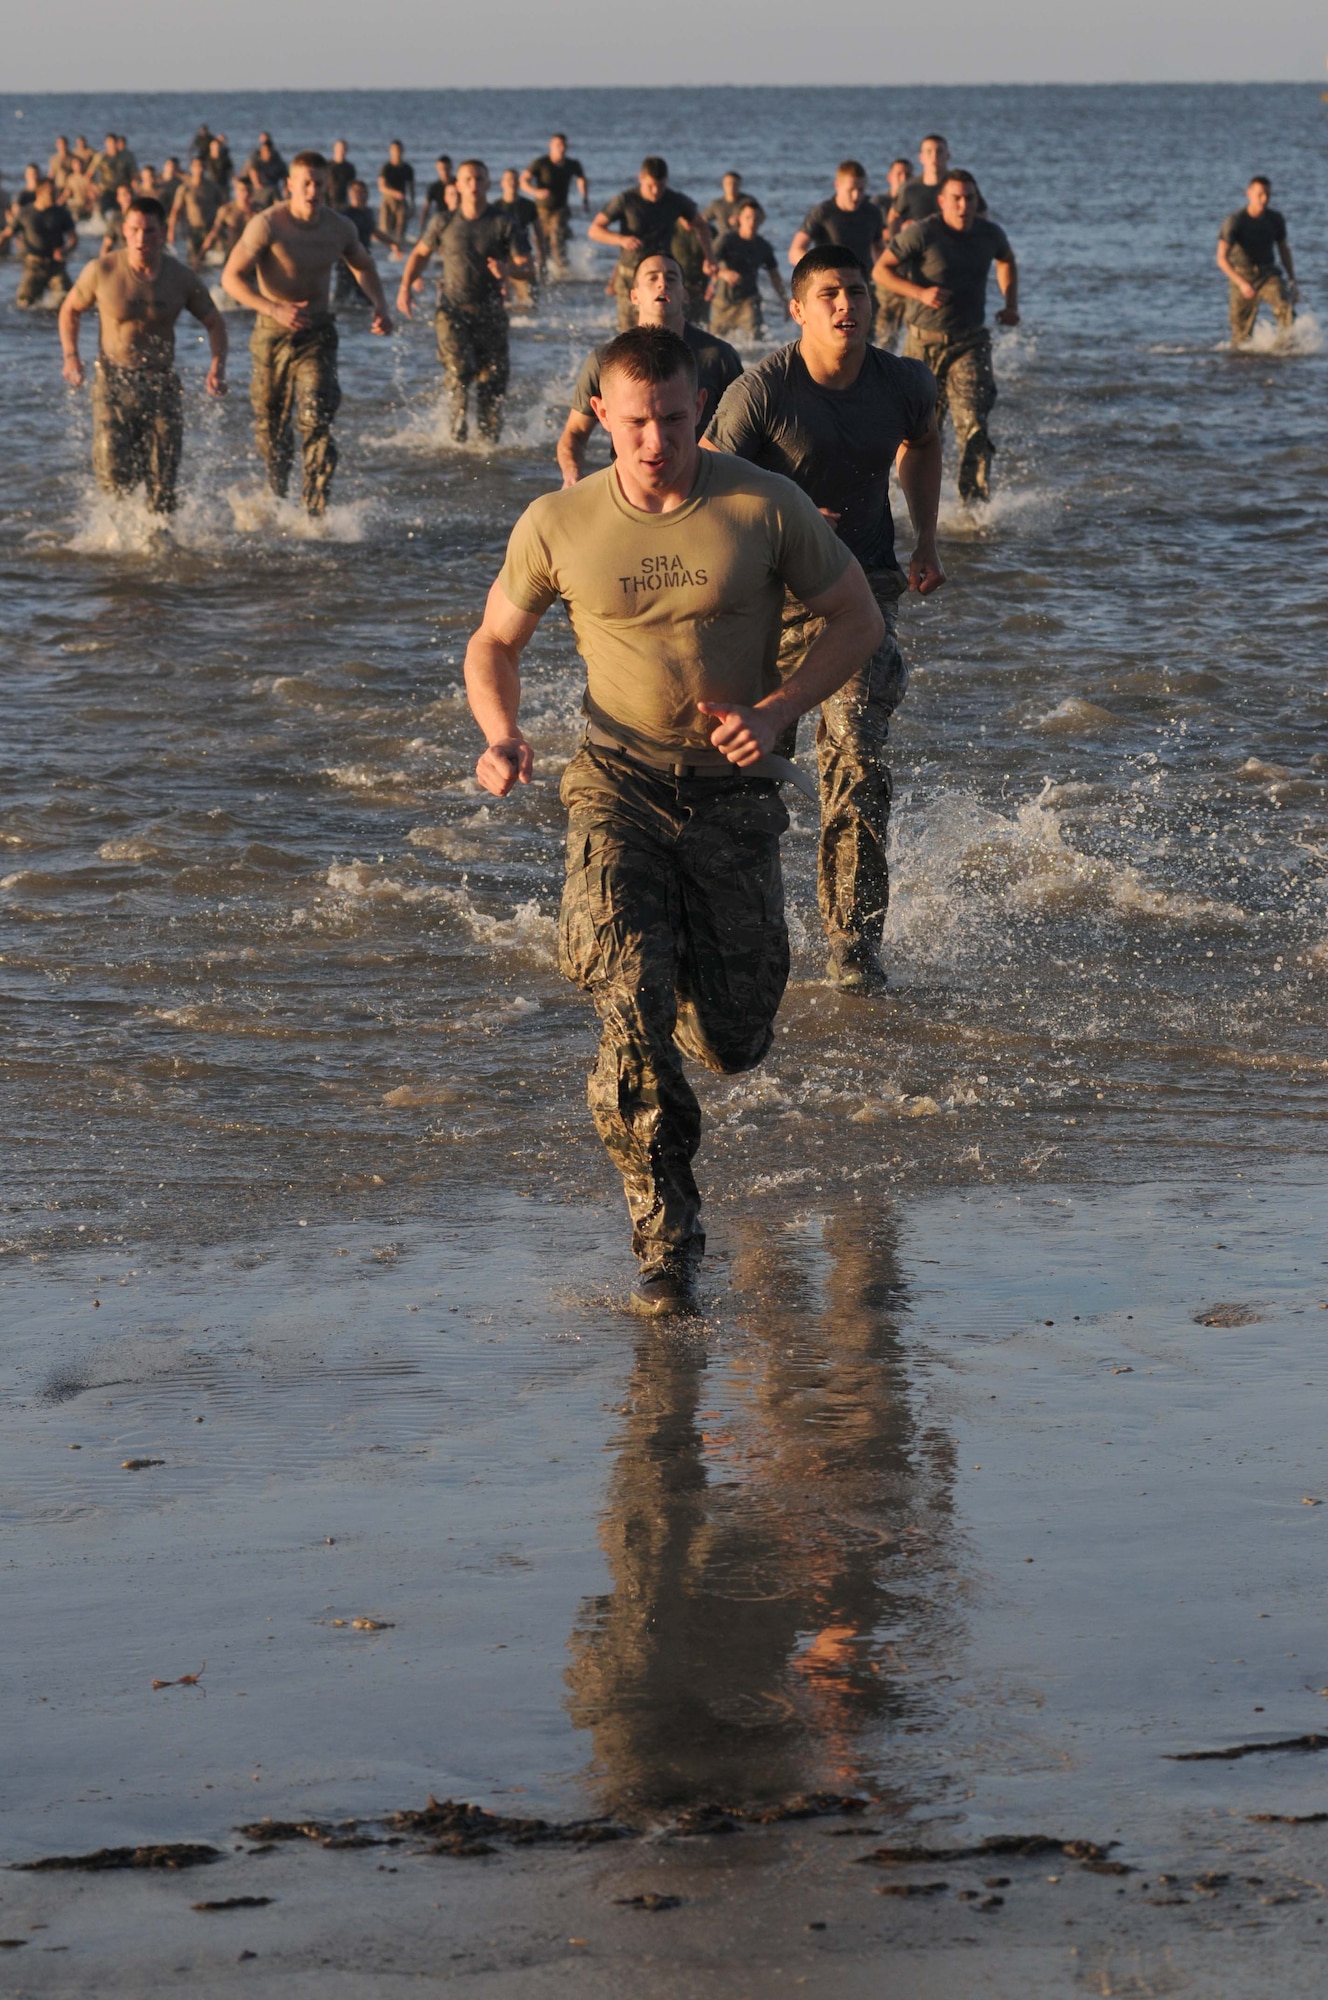 Combat control trainees from the 334th Training Squadron run back on shore after doing 100 jumping jacks in the Gulf of Mexico during a physical training session April 12, 2013, on Biloxi beach.  Combat controllers are ground troops who are embedded with special forces teams and provide close-air support for special forces units. While at Keesler, trainees learn how to run, swim, carry a rucksack and conduct air traffic control. These Airmen are prepared physically and mentally for the demands of the combat controller pipeline while earning air traffic control certification in just 15 weeks.  (U.S. Air Force photo by Kemberly Groue)